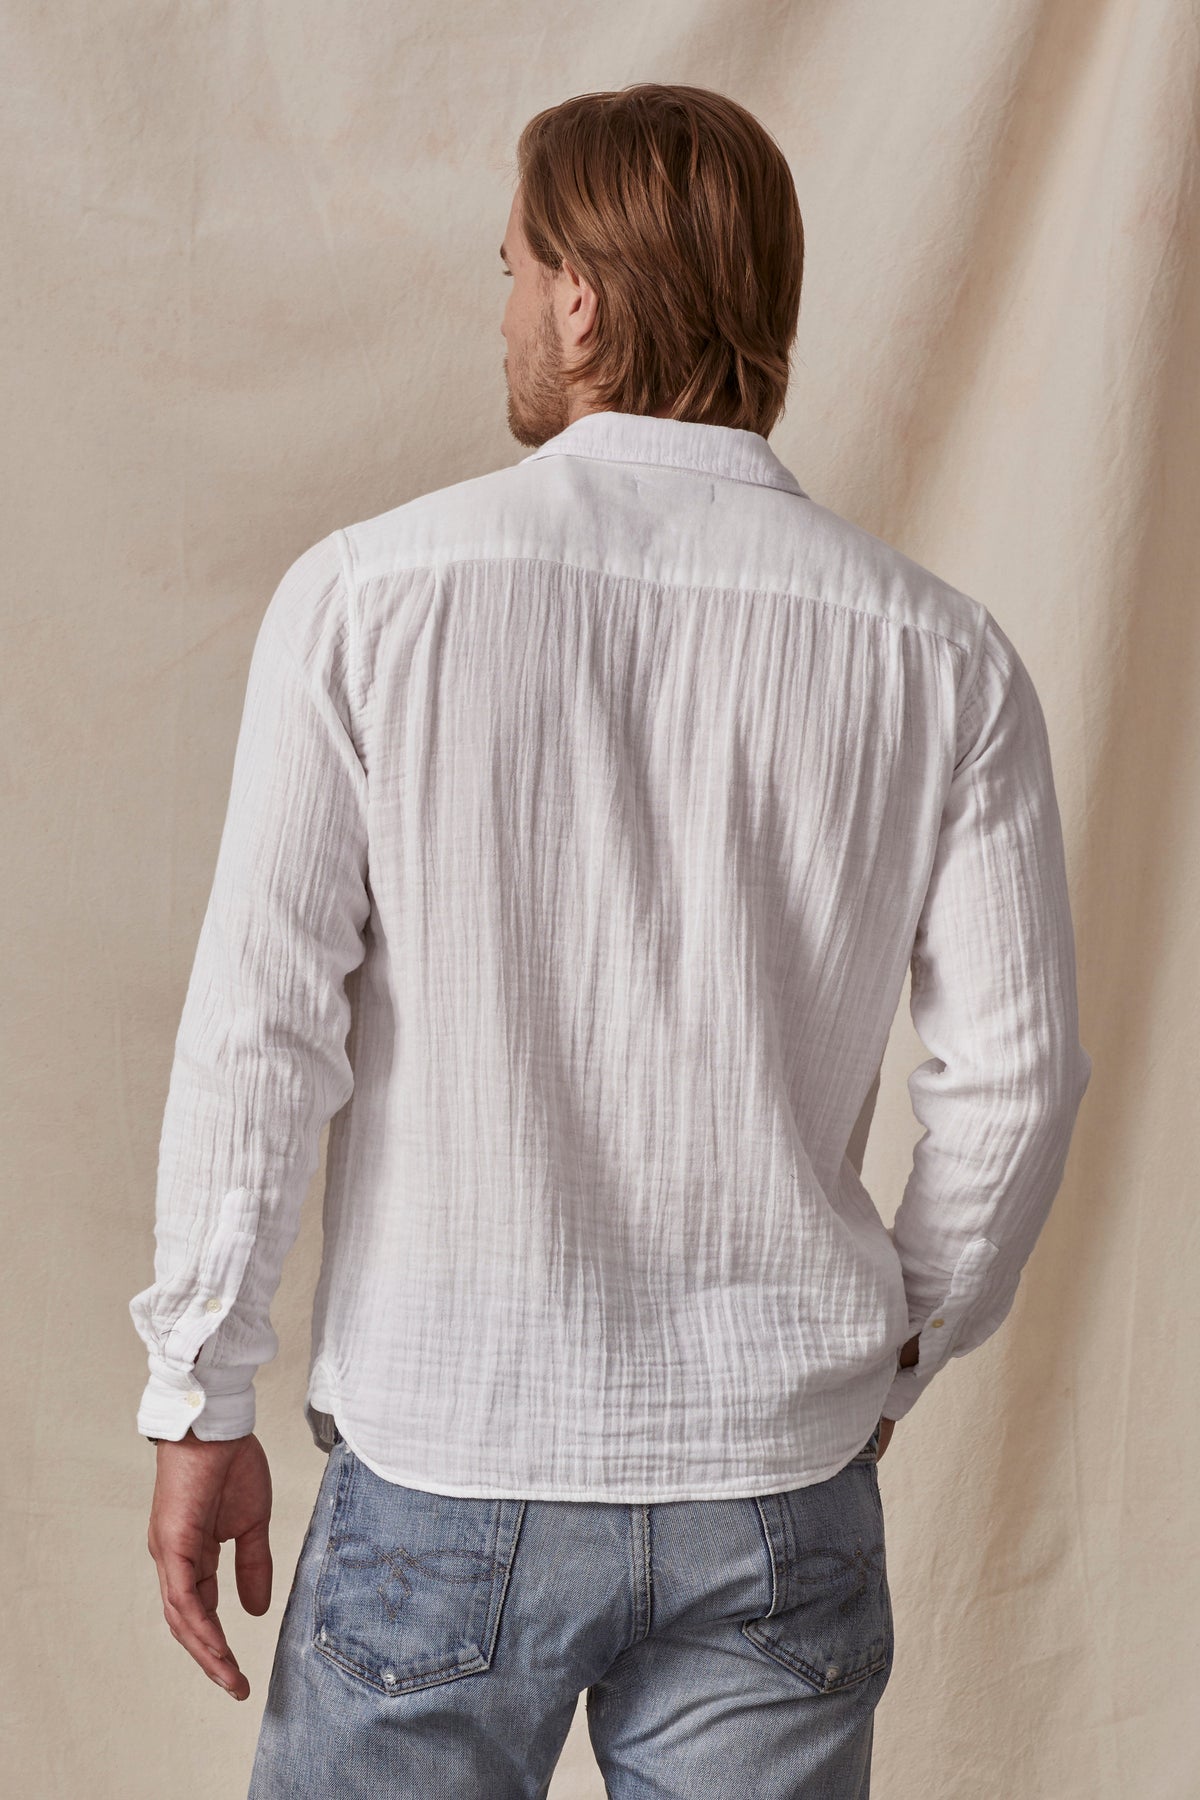 The back of a man wearing casual jeans and a Velvet by Graham & Spencer ELTON BUTTON-UP SHIRT.-36009391882433